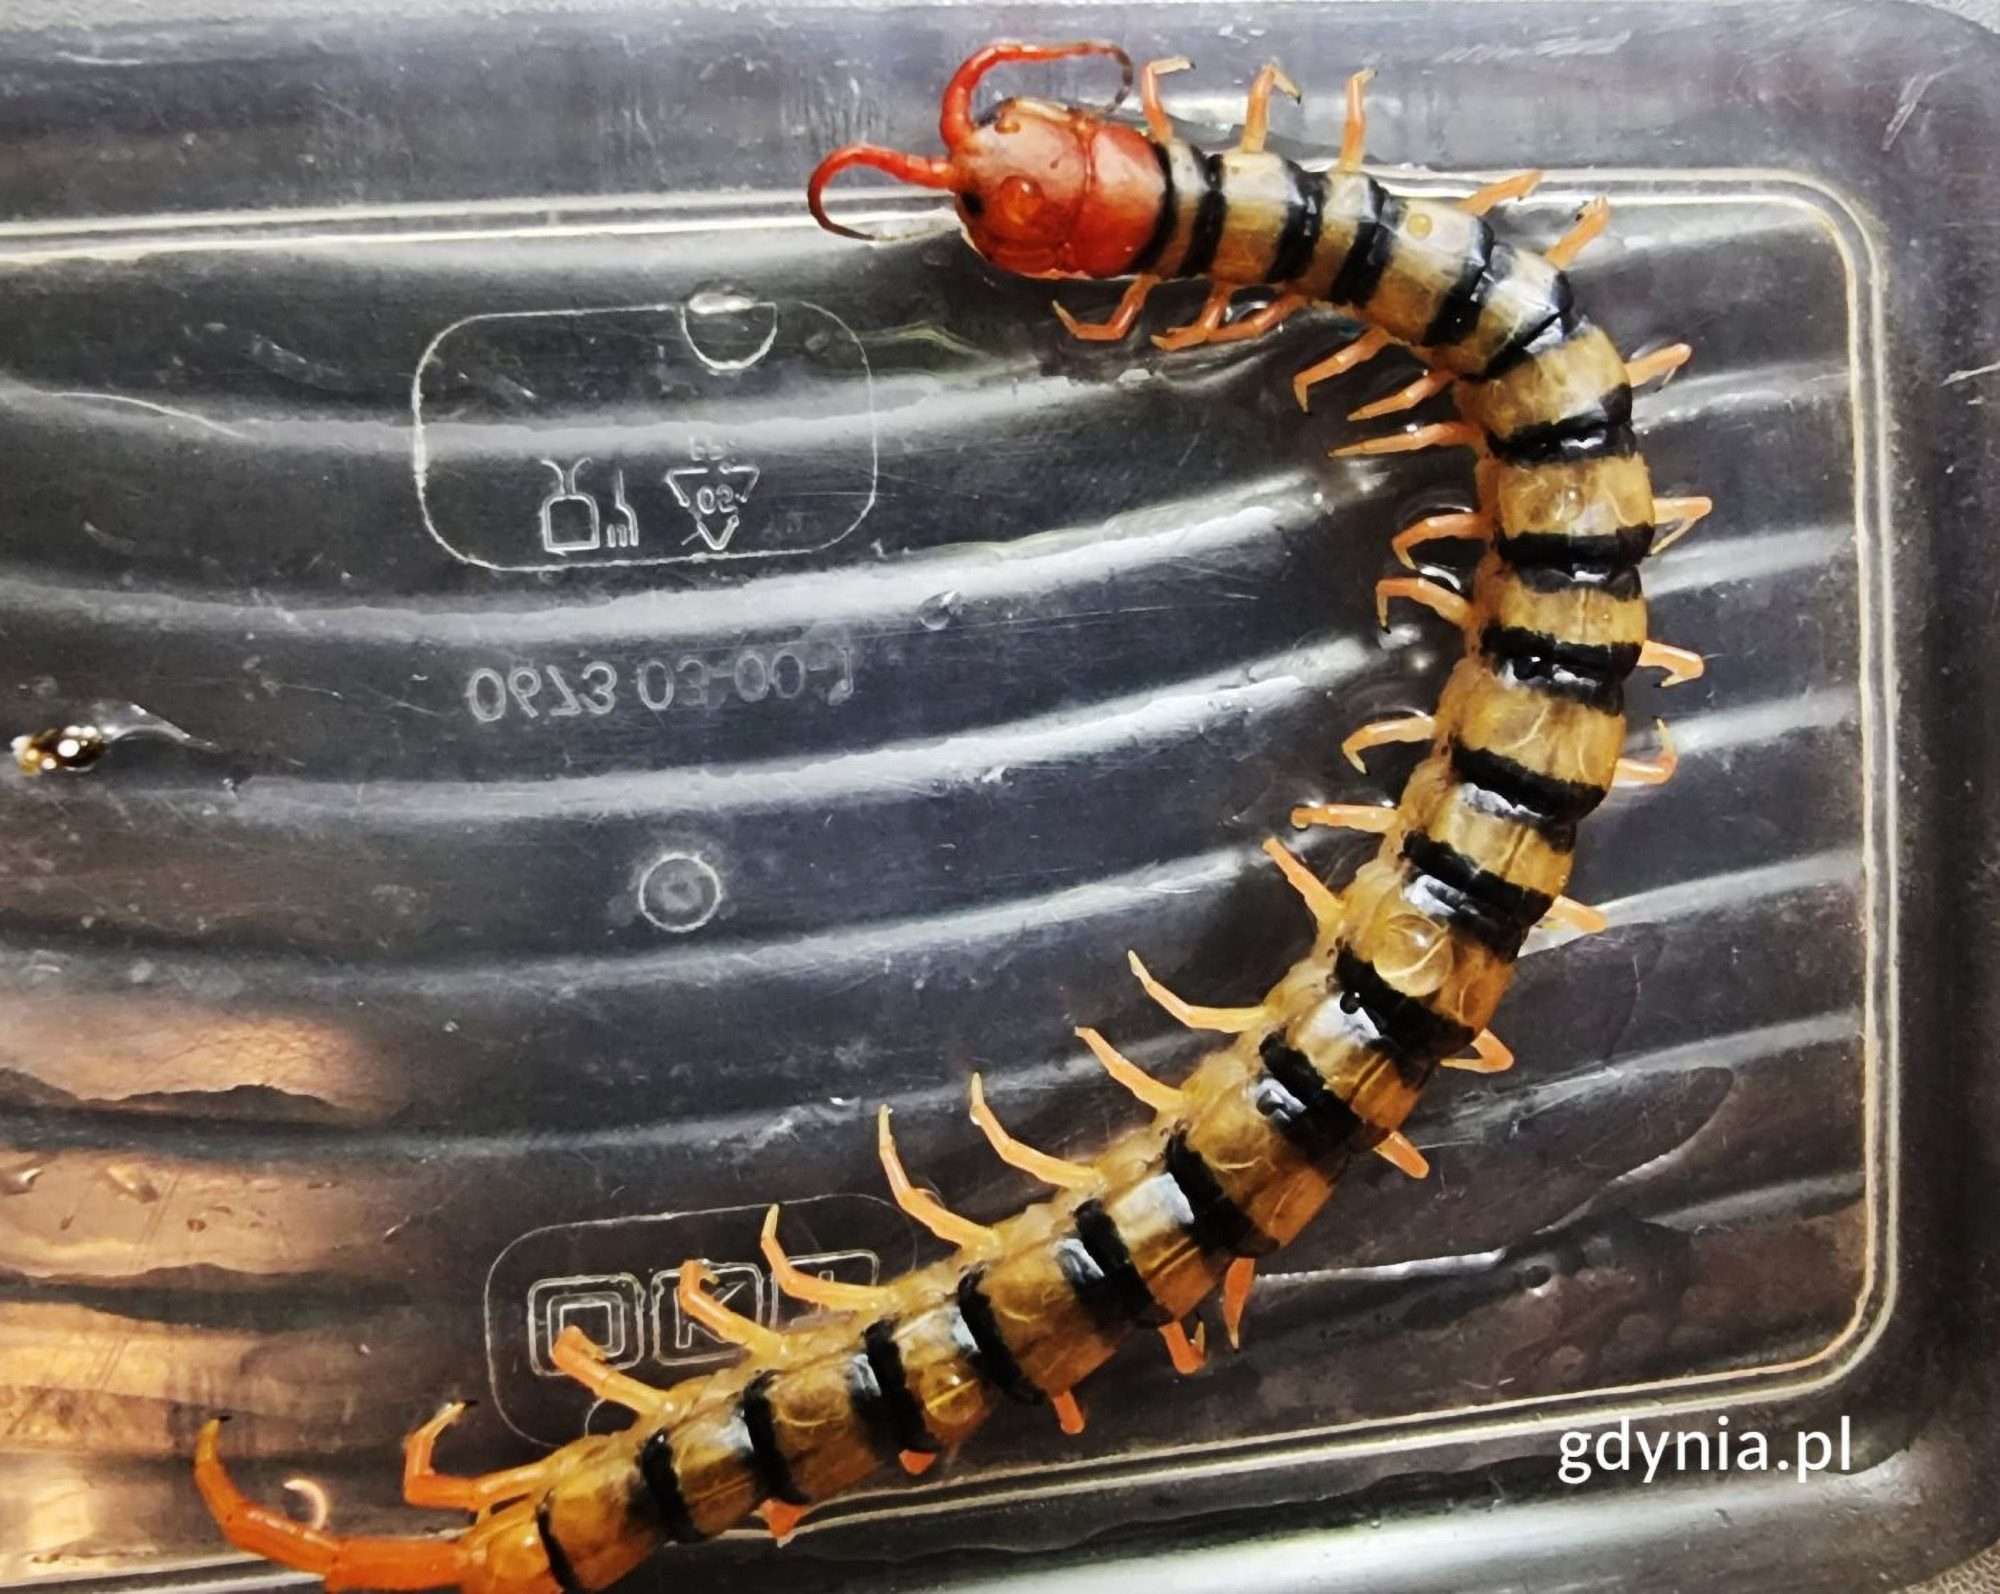 Read more about the article Holidaymaker Finds Giant Venomous Centipede In His Undies